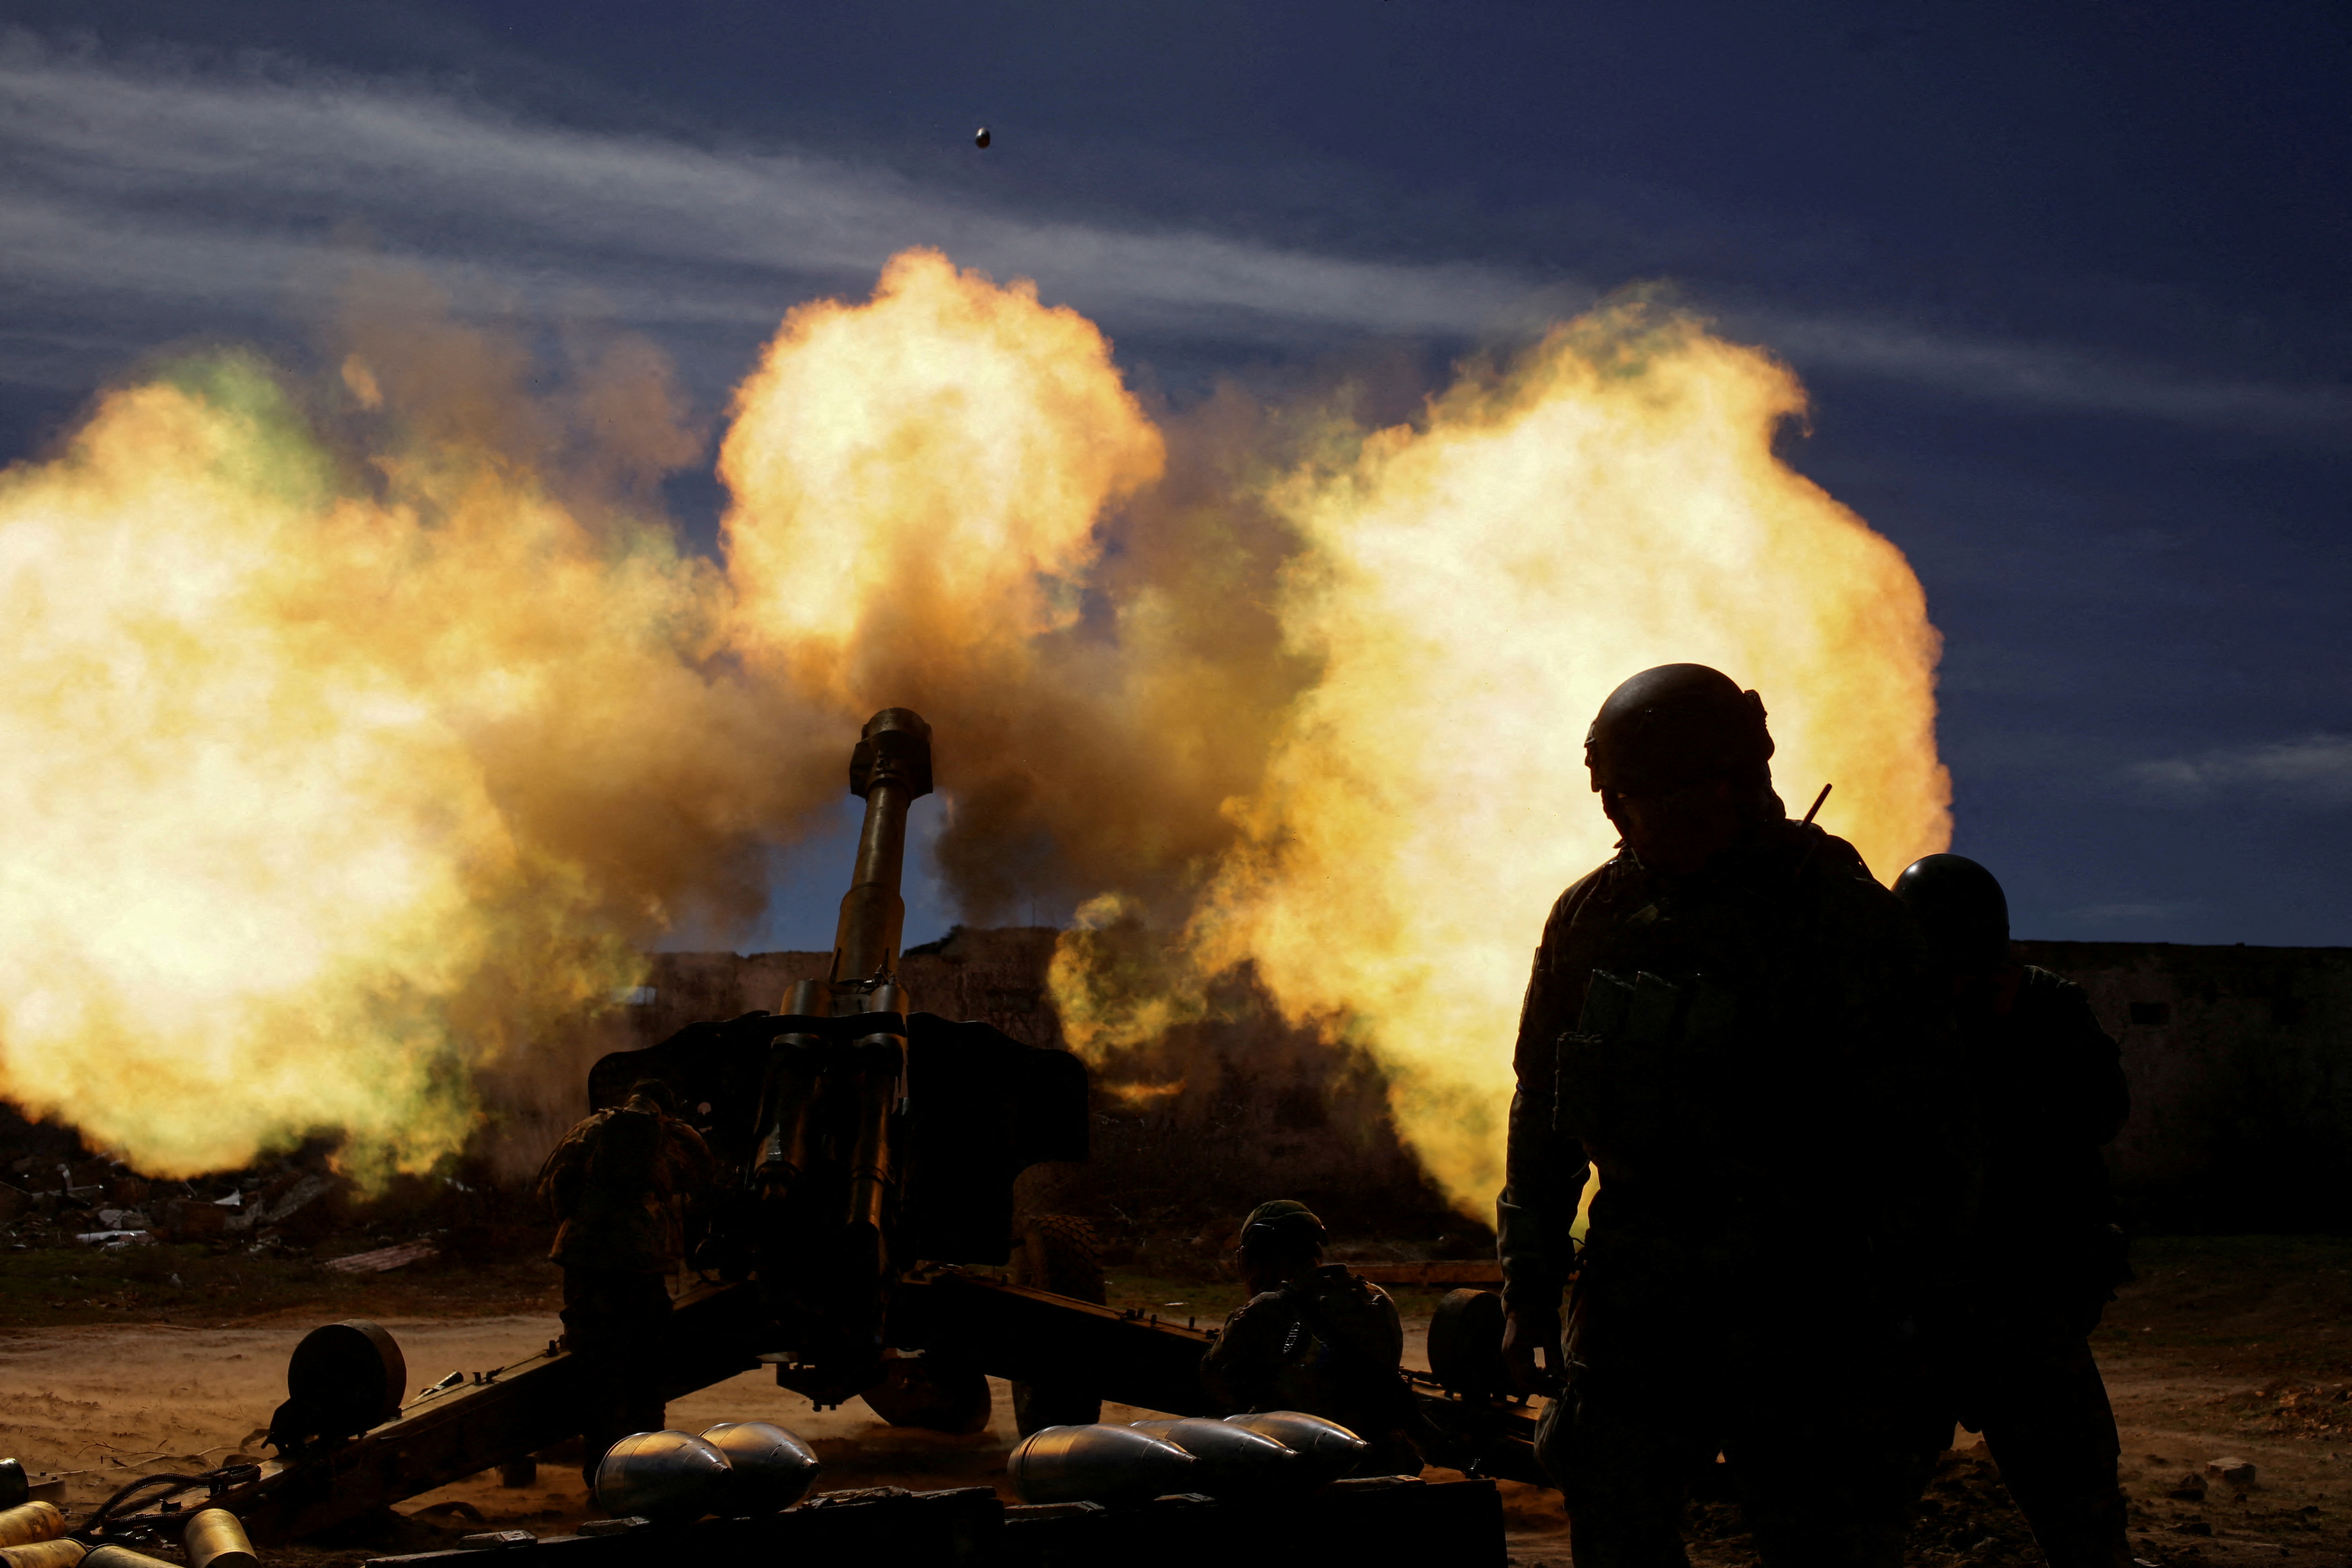 Members of the Ukrainian Volunteer Corps fire a howitzer, as Russia's attack on Ukraine continues, at a position in Zaporizhzhia region, Ukraine March 28, 2022. Picture taken March 28, 2022. REUTERS/ Stanislav Yurchenko/File photo